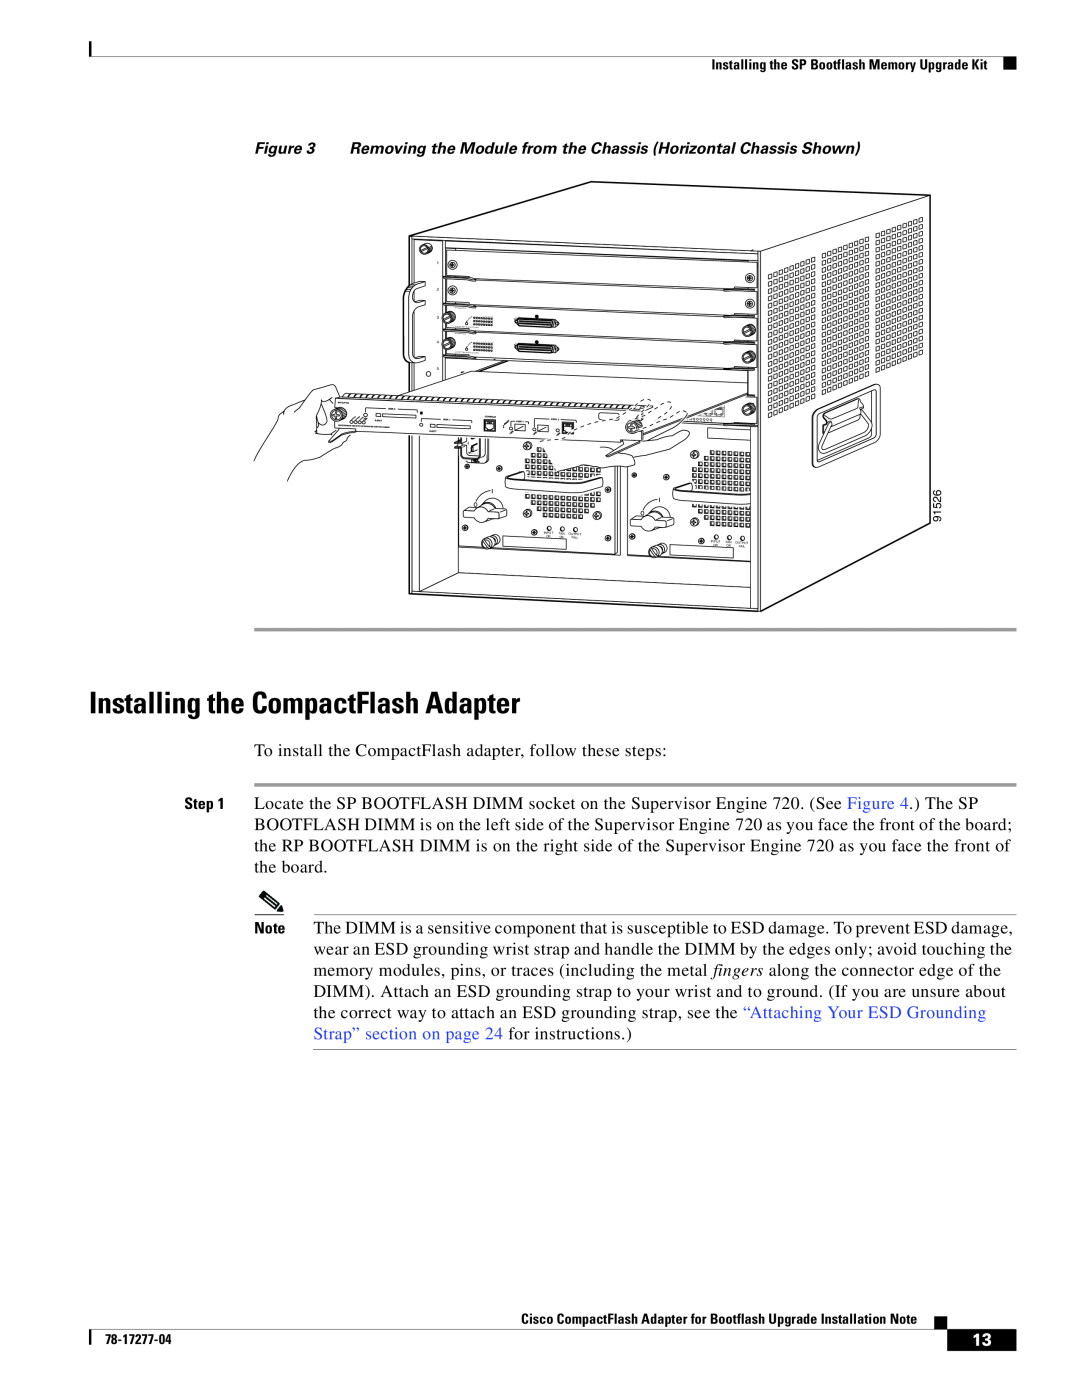 Cisco Systems manual Installing the CompactFlash Adapter 